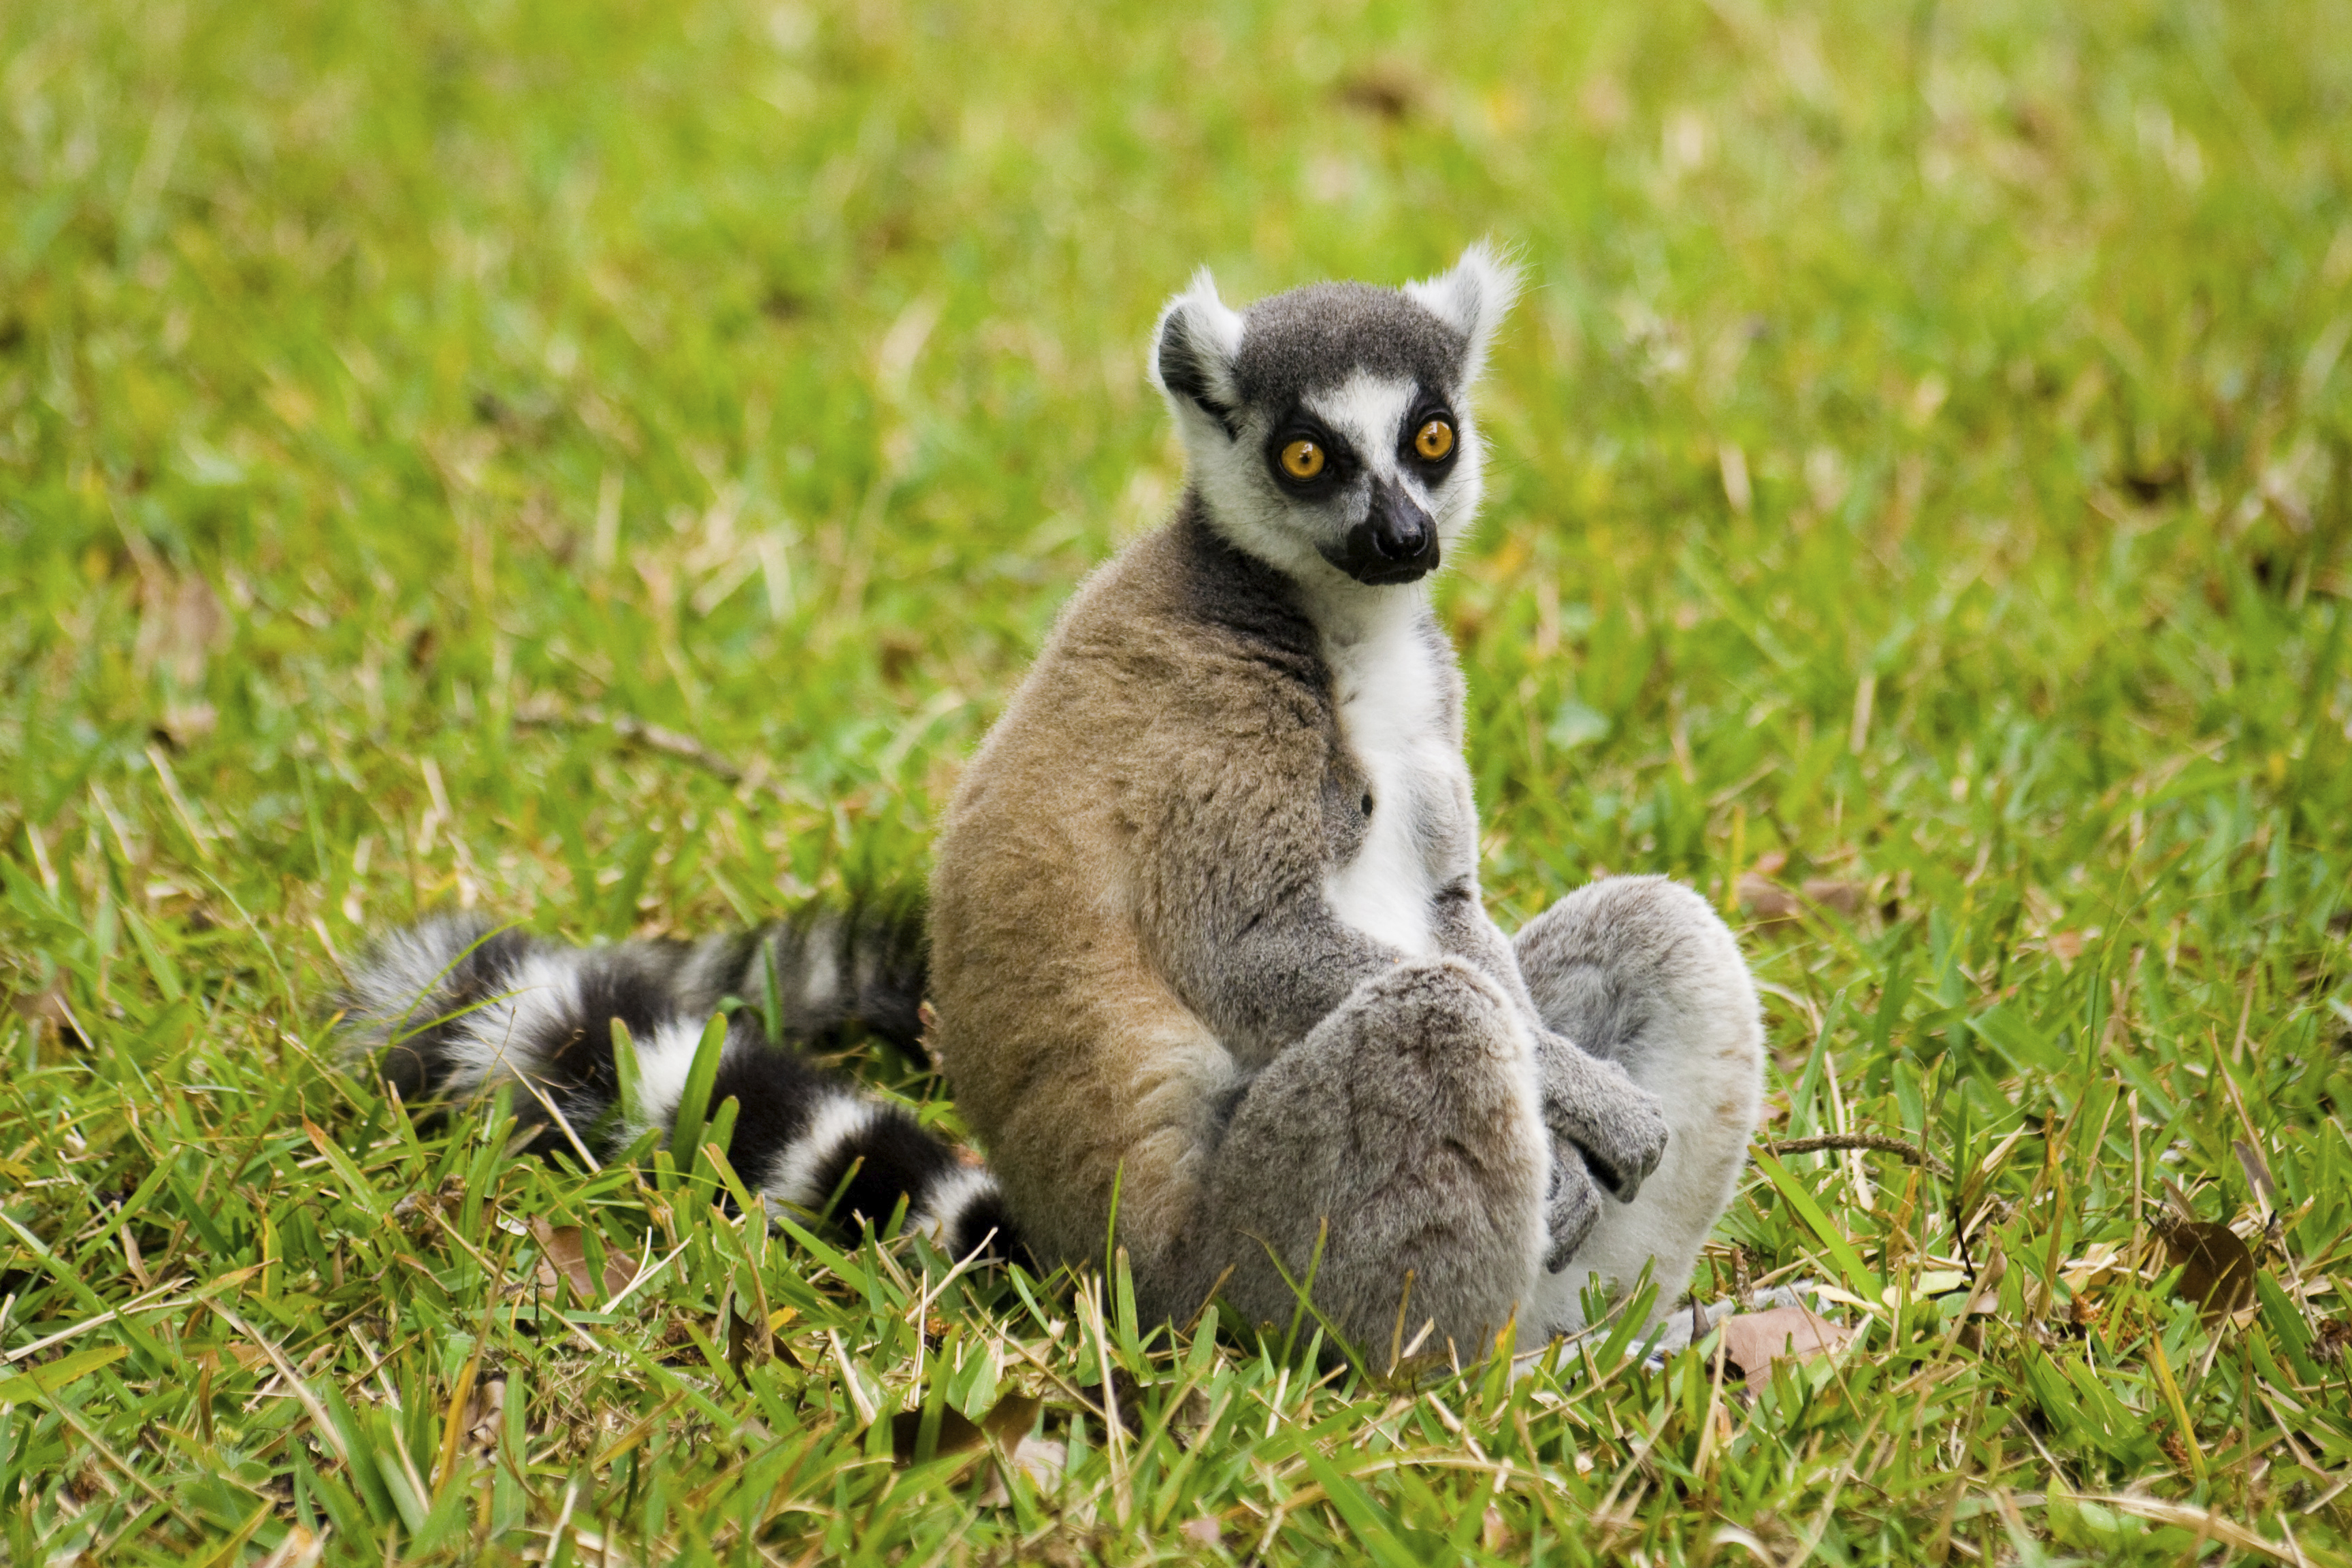 Lemurs are a big attraction